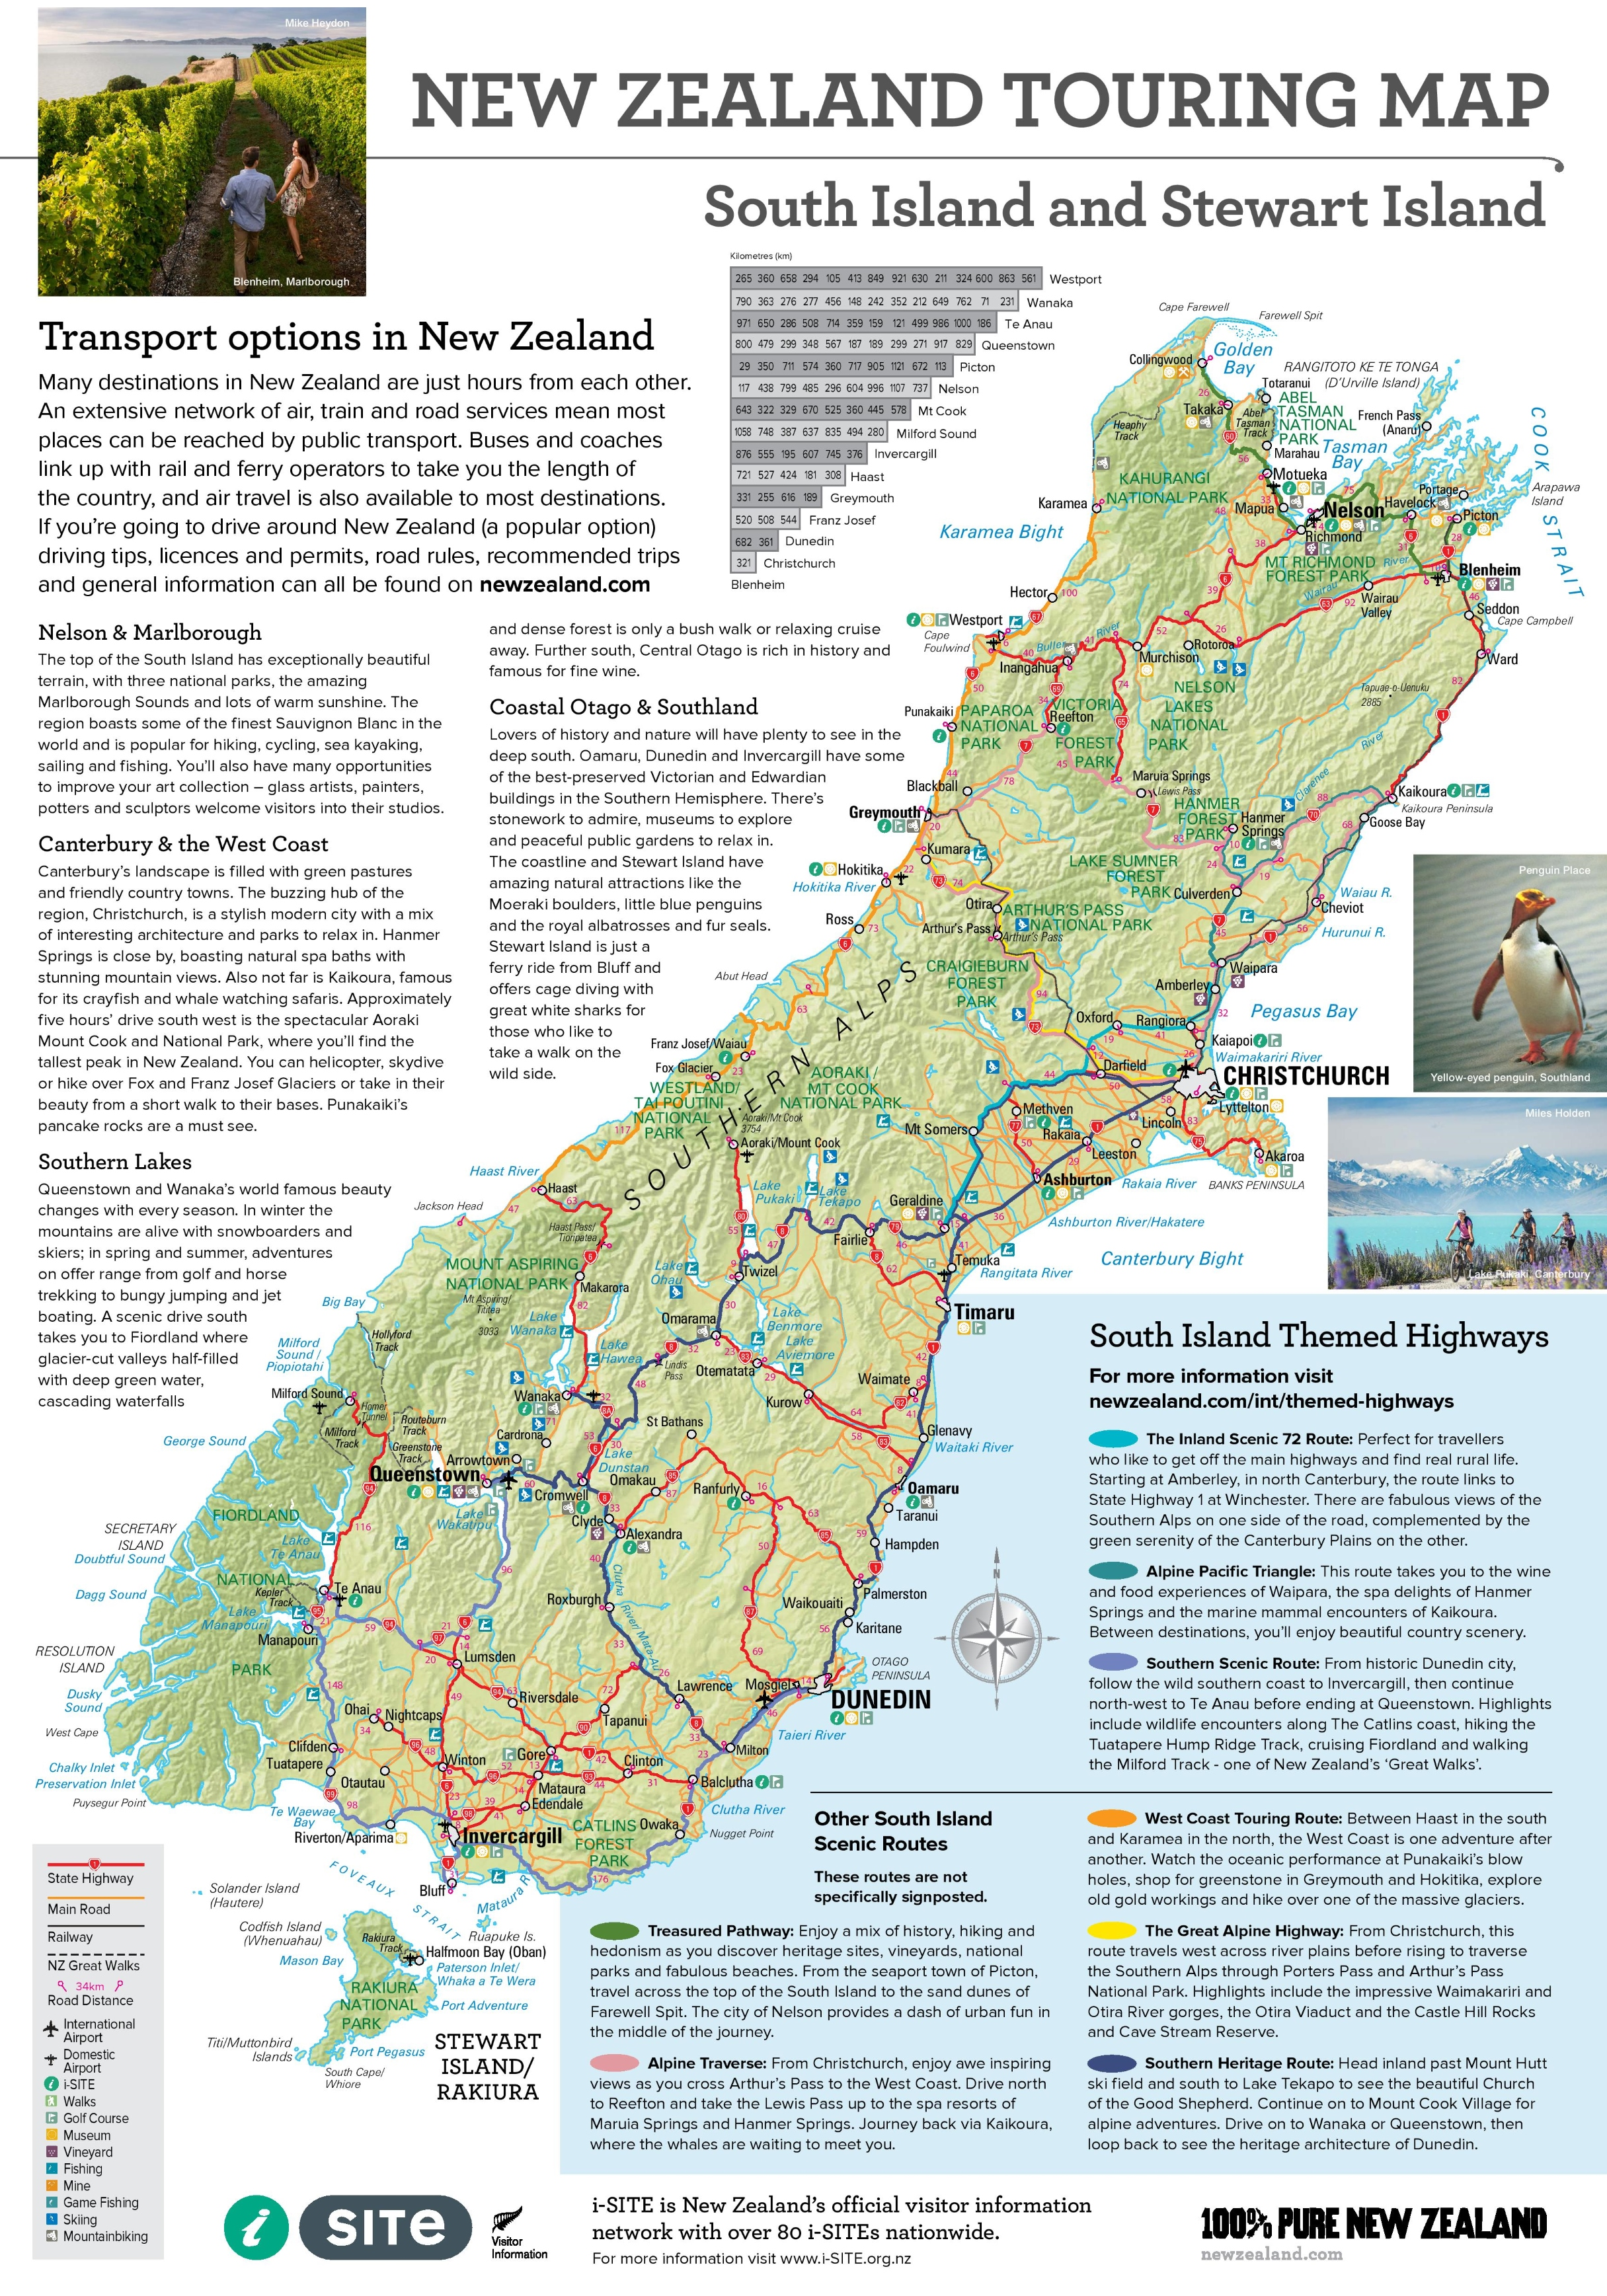 THEMED HIGHWAYS SOUTH ISLAND